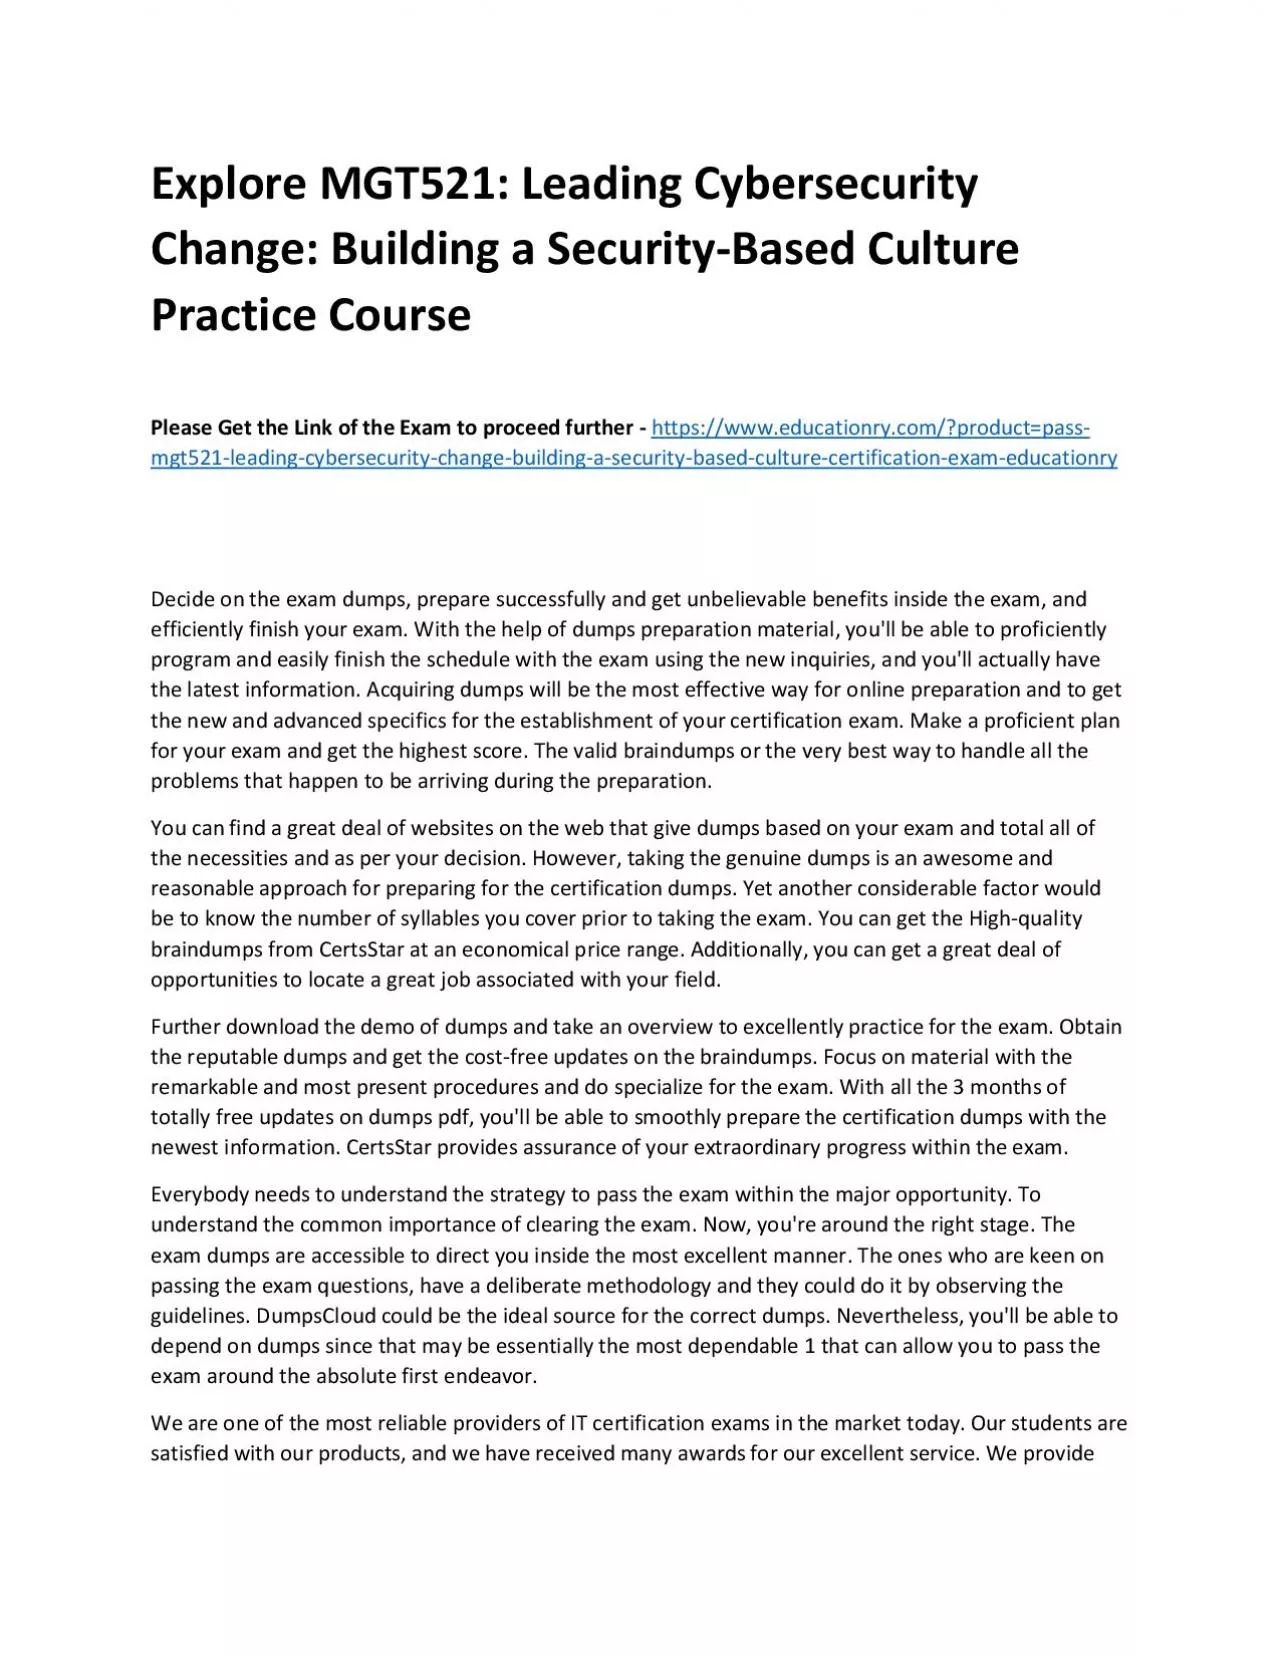 MGT521: Leading Cybersecurity Change: Building a Security-Based Culture